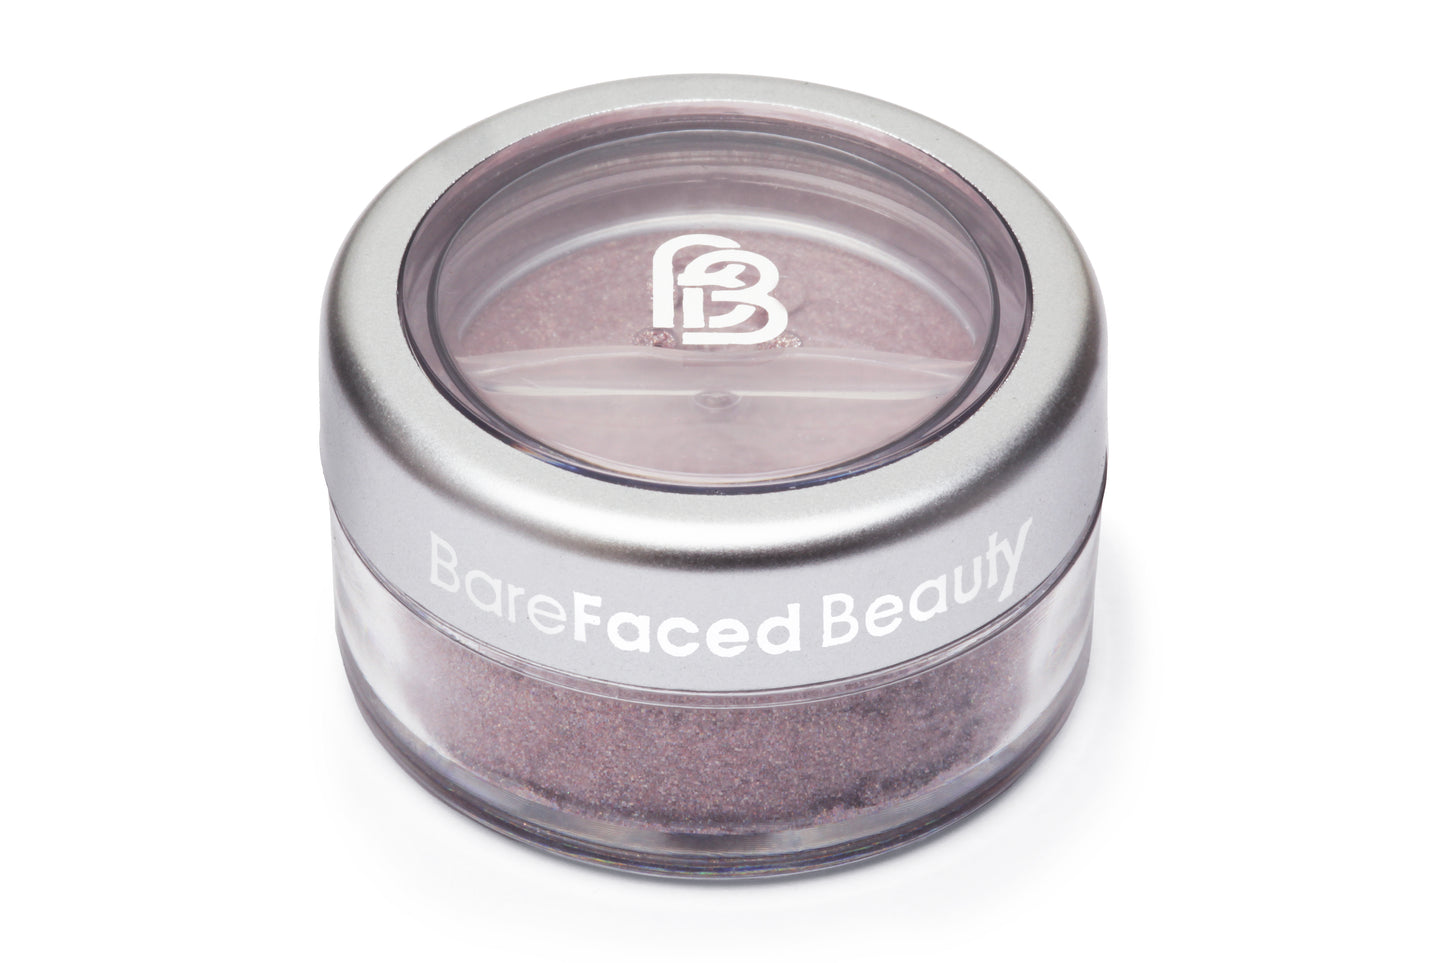 A small round clear pot of barefaced beauty natural mineral eyeshadow